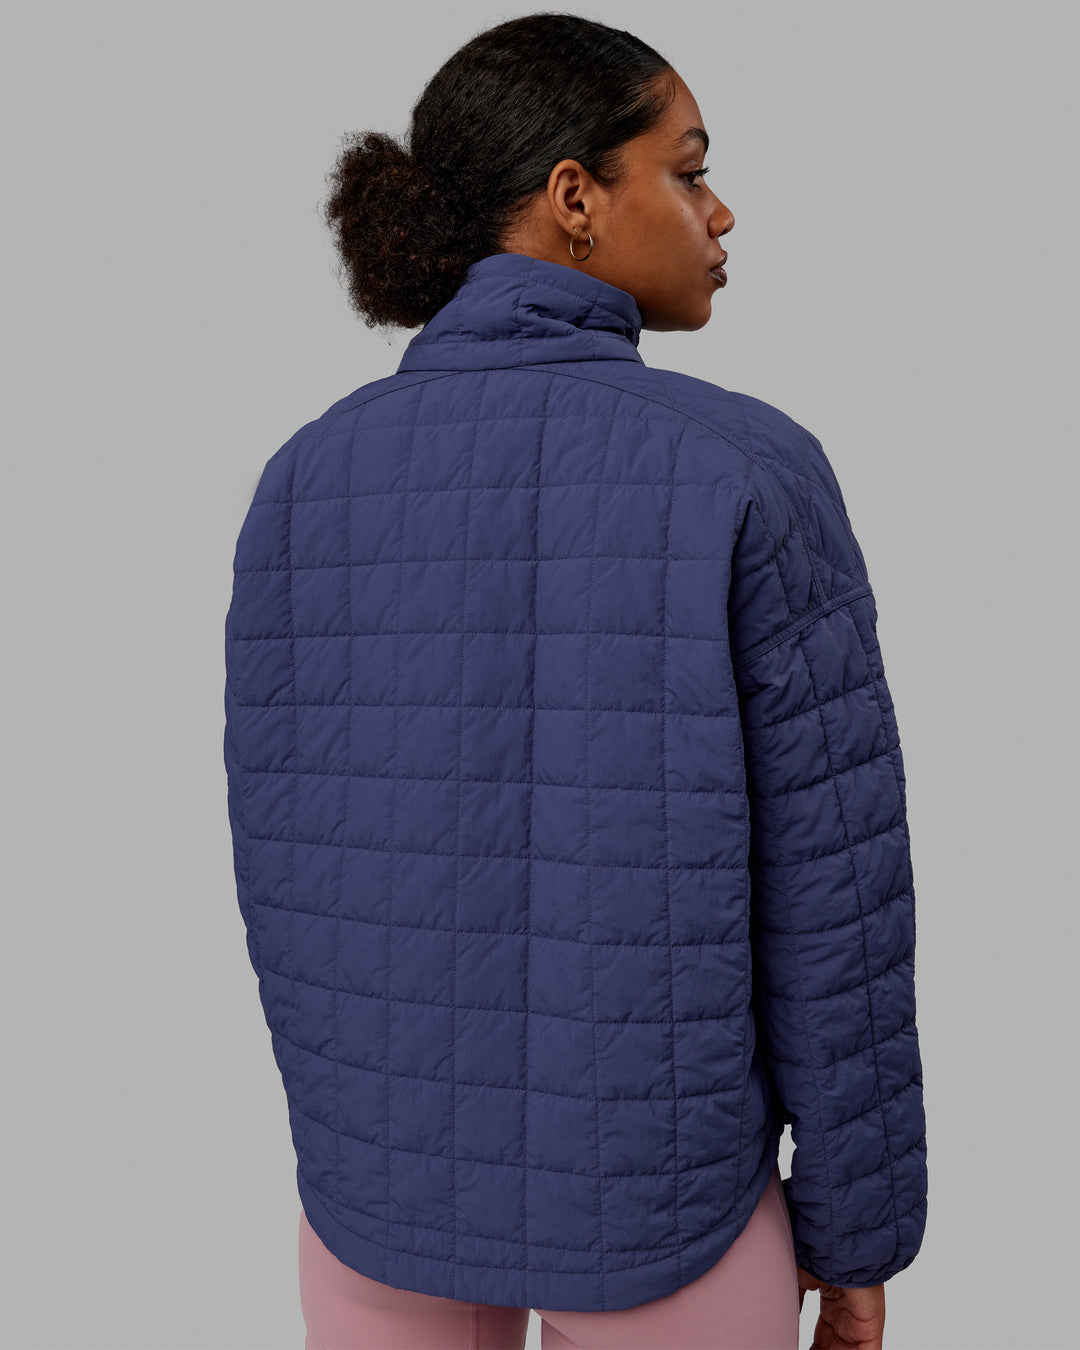 Woman wearing Thrive Packable Jacket - Future Dusk